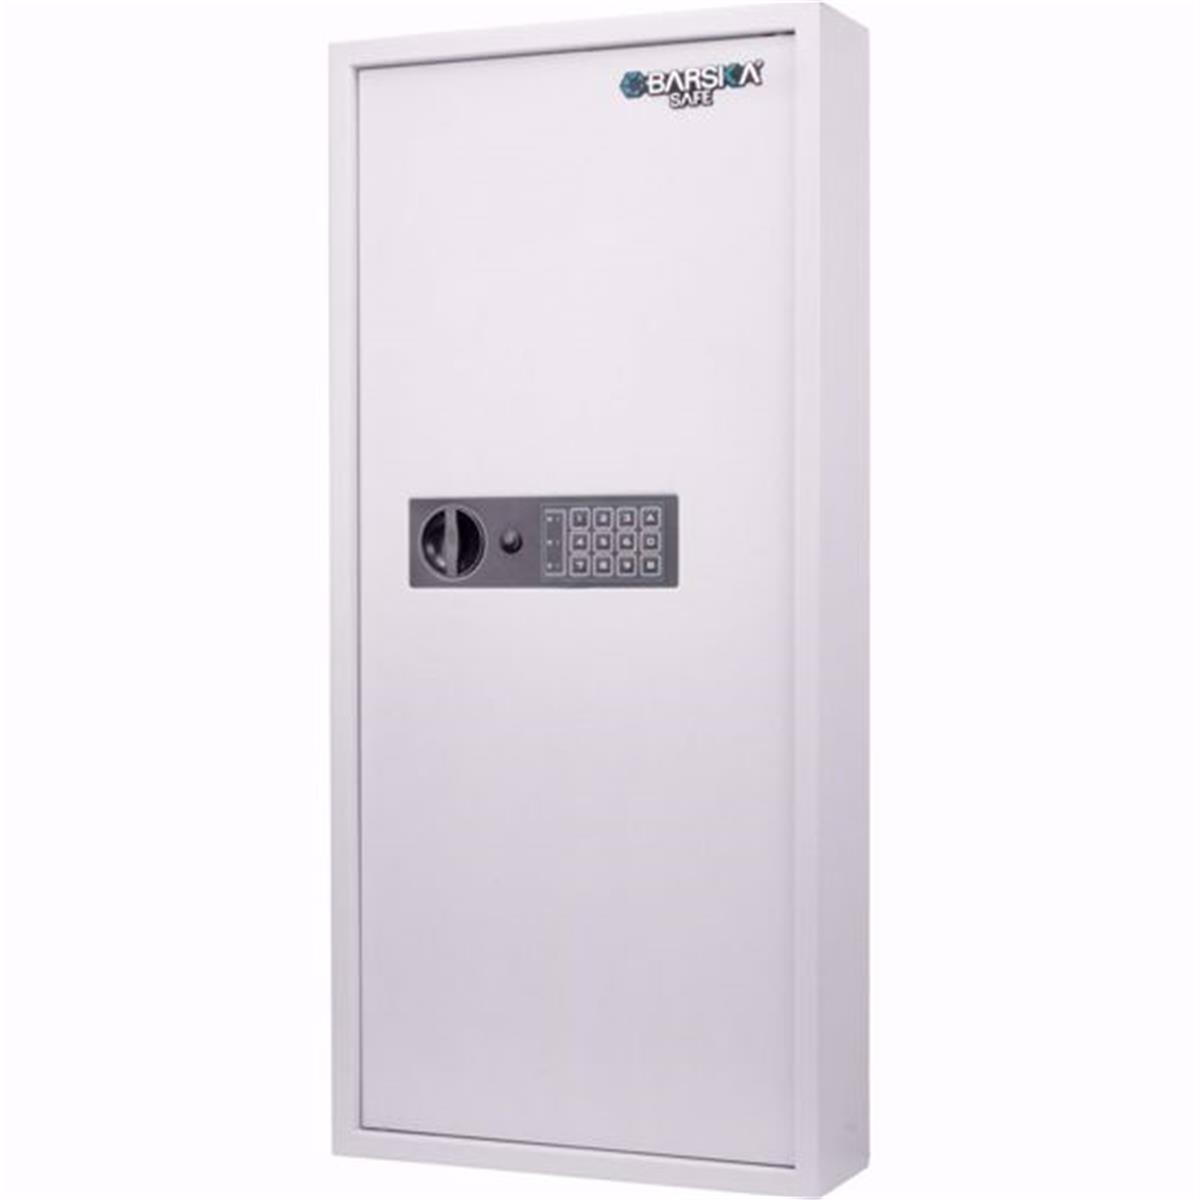 Picture of Barska AX13368 240 Key Cabinet Digital Wall Safe - White